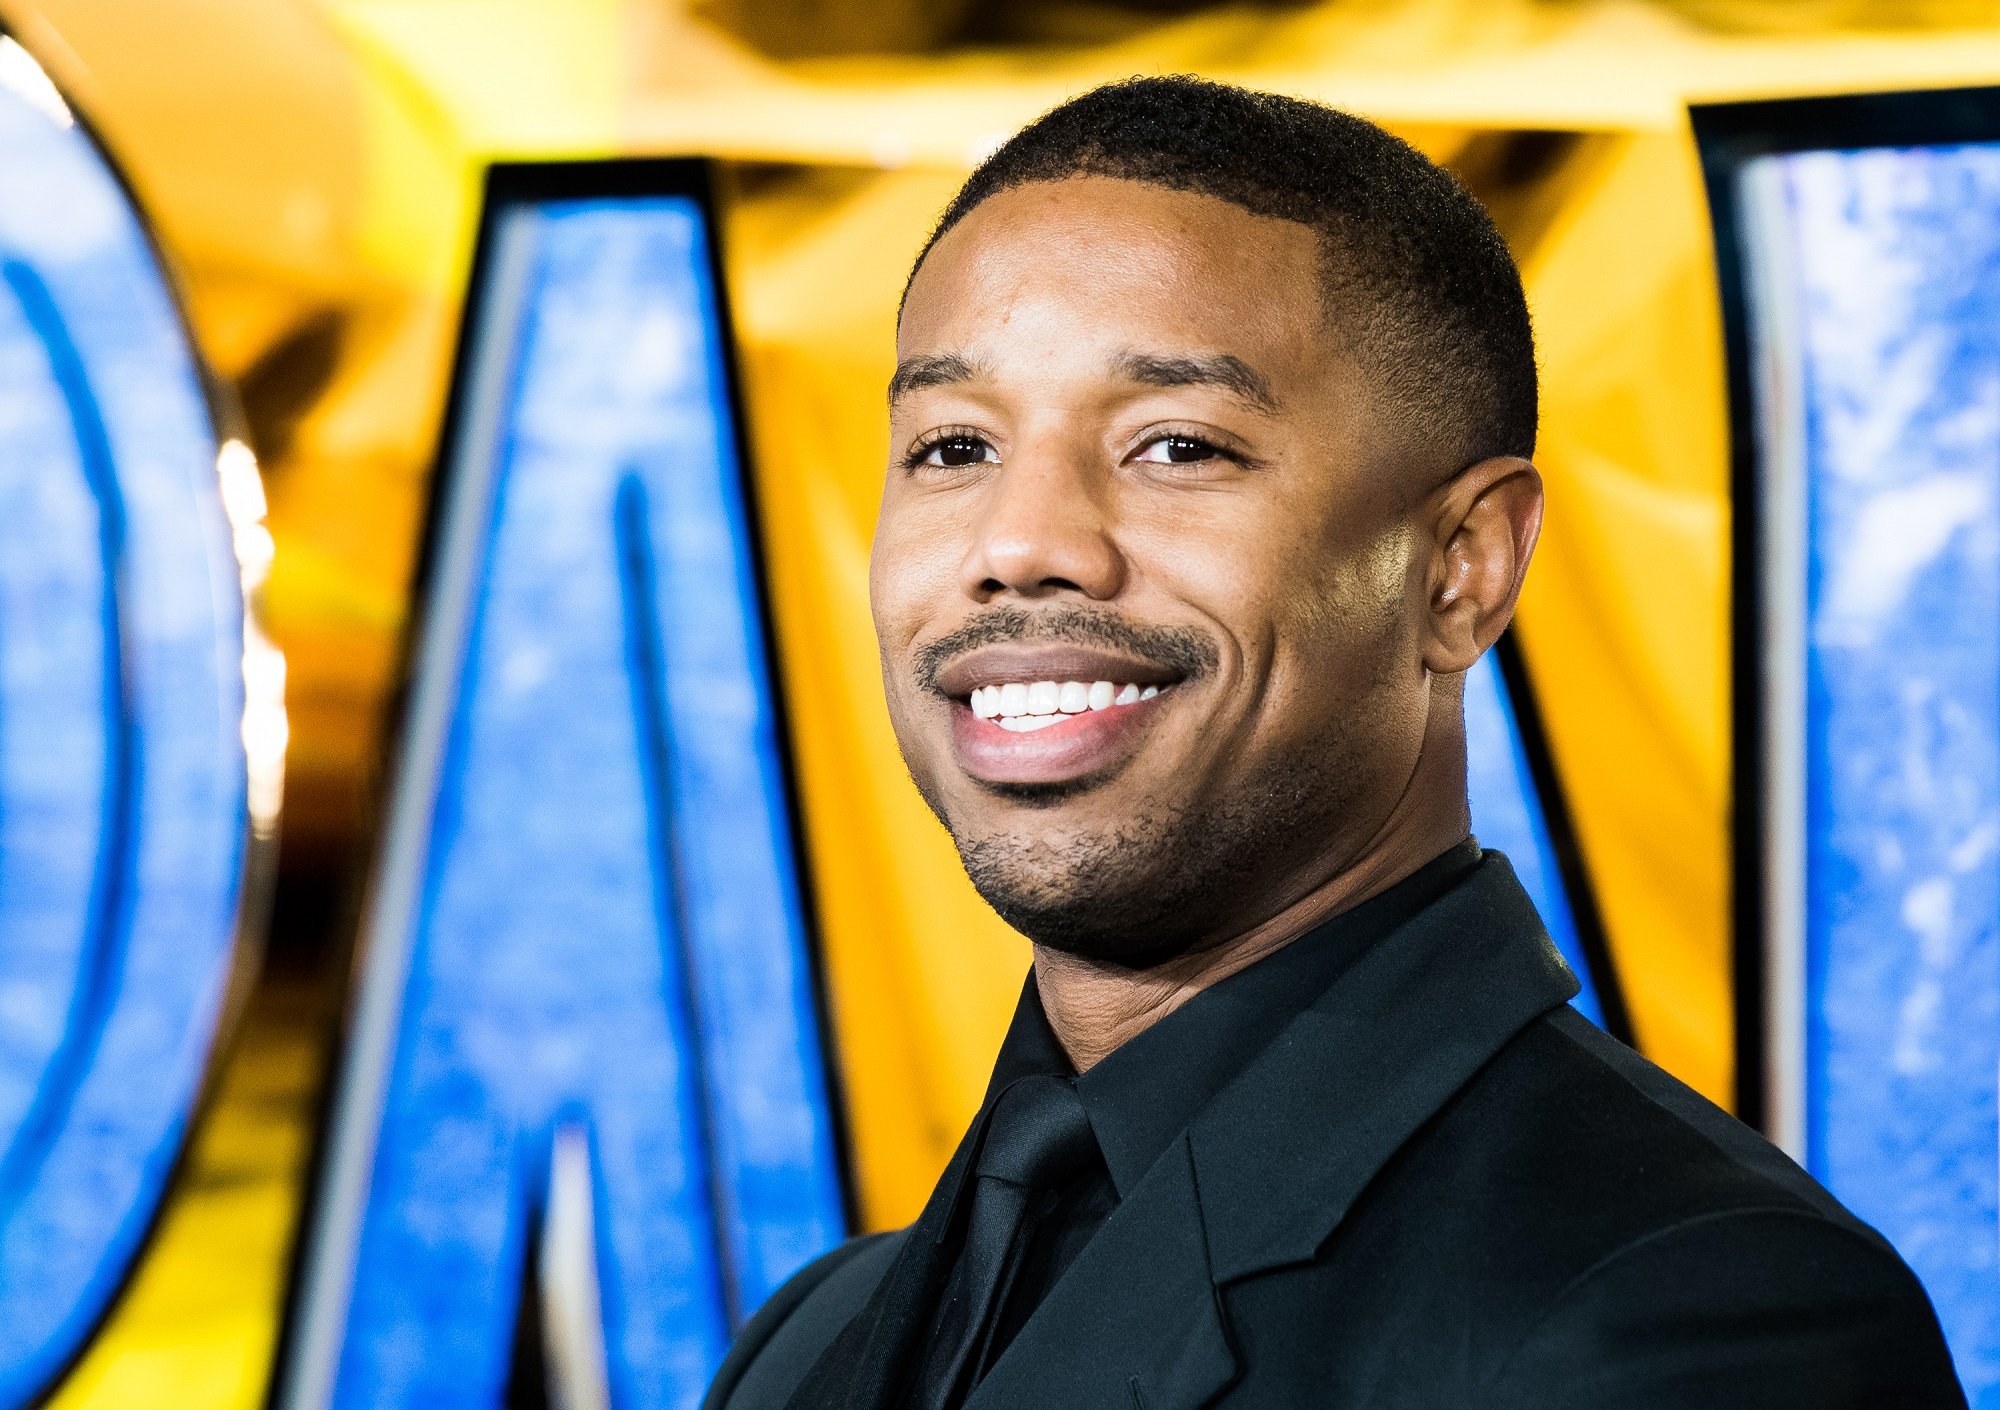 Michael B. Jordan attends the European Premiere of 'Black Panther' on February 8, 2018 in London, England.